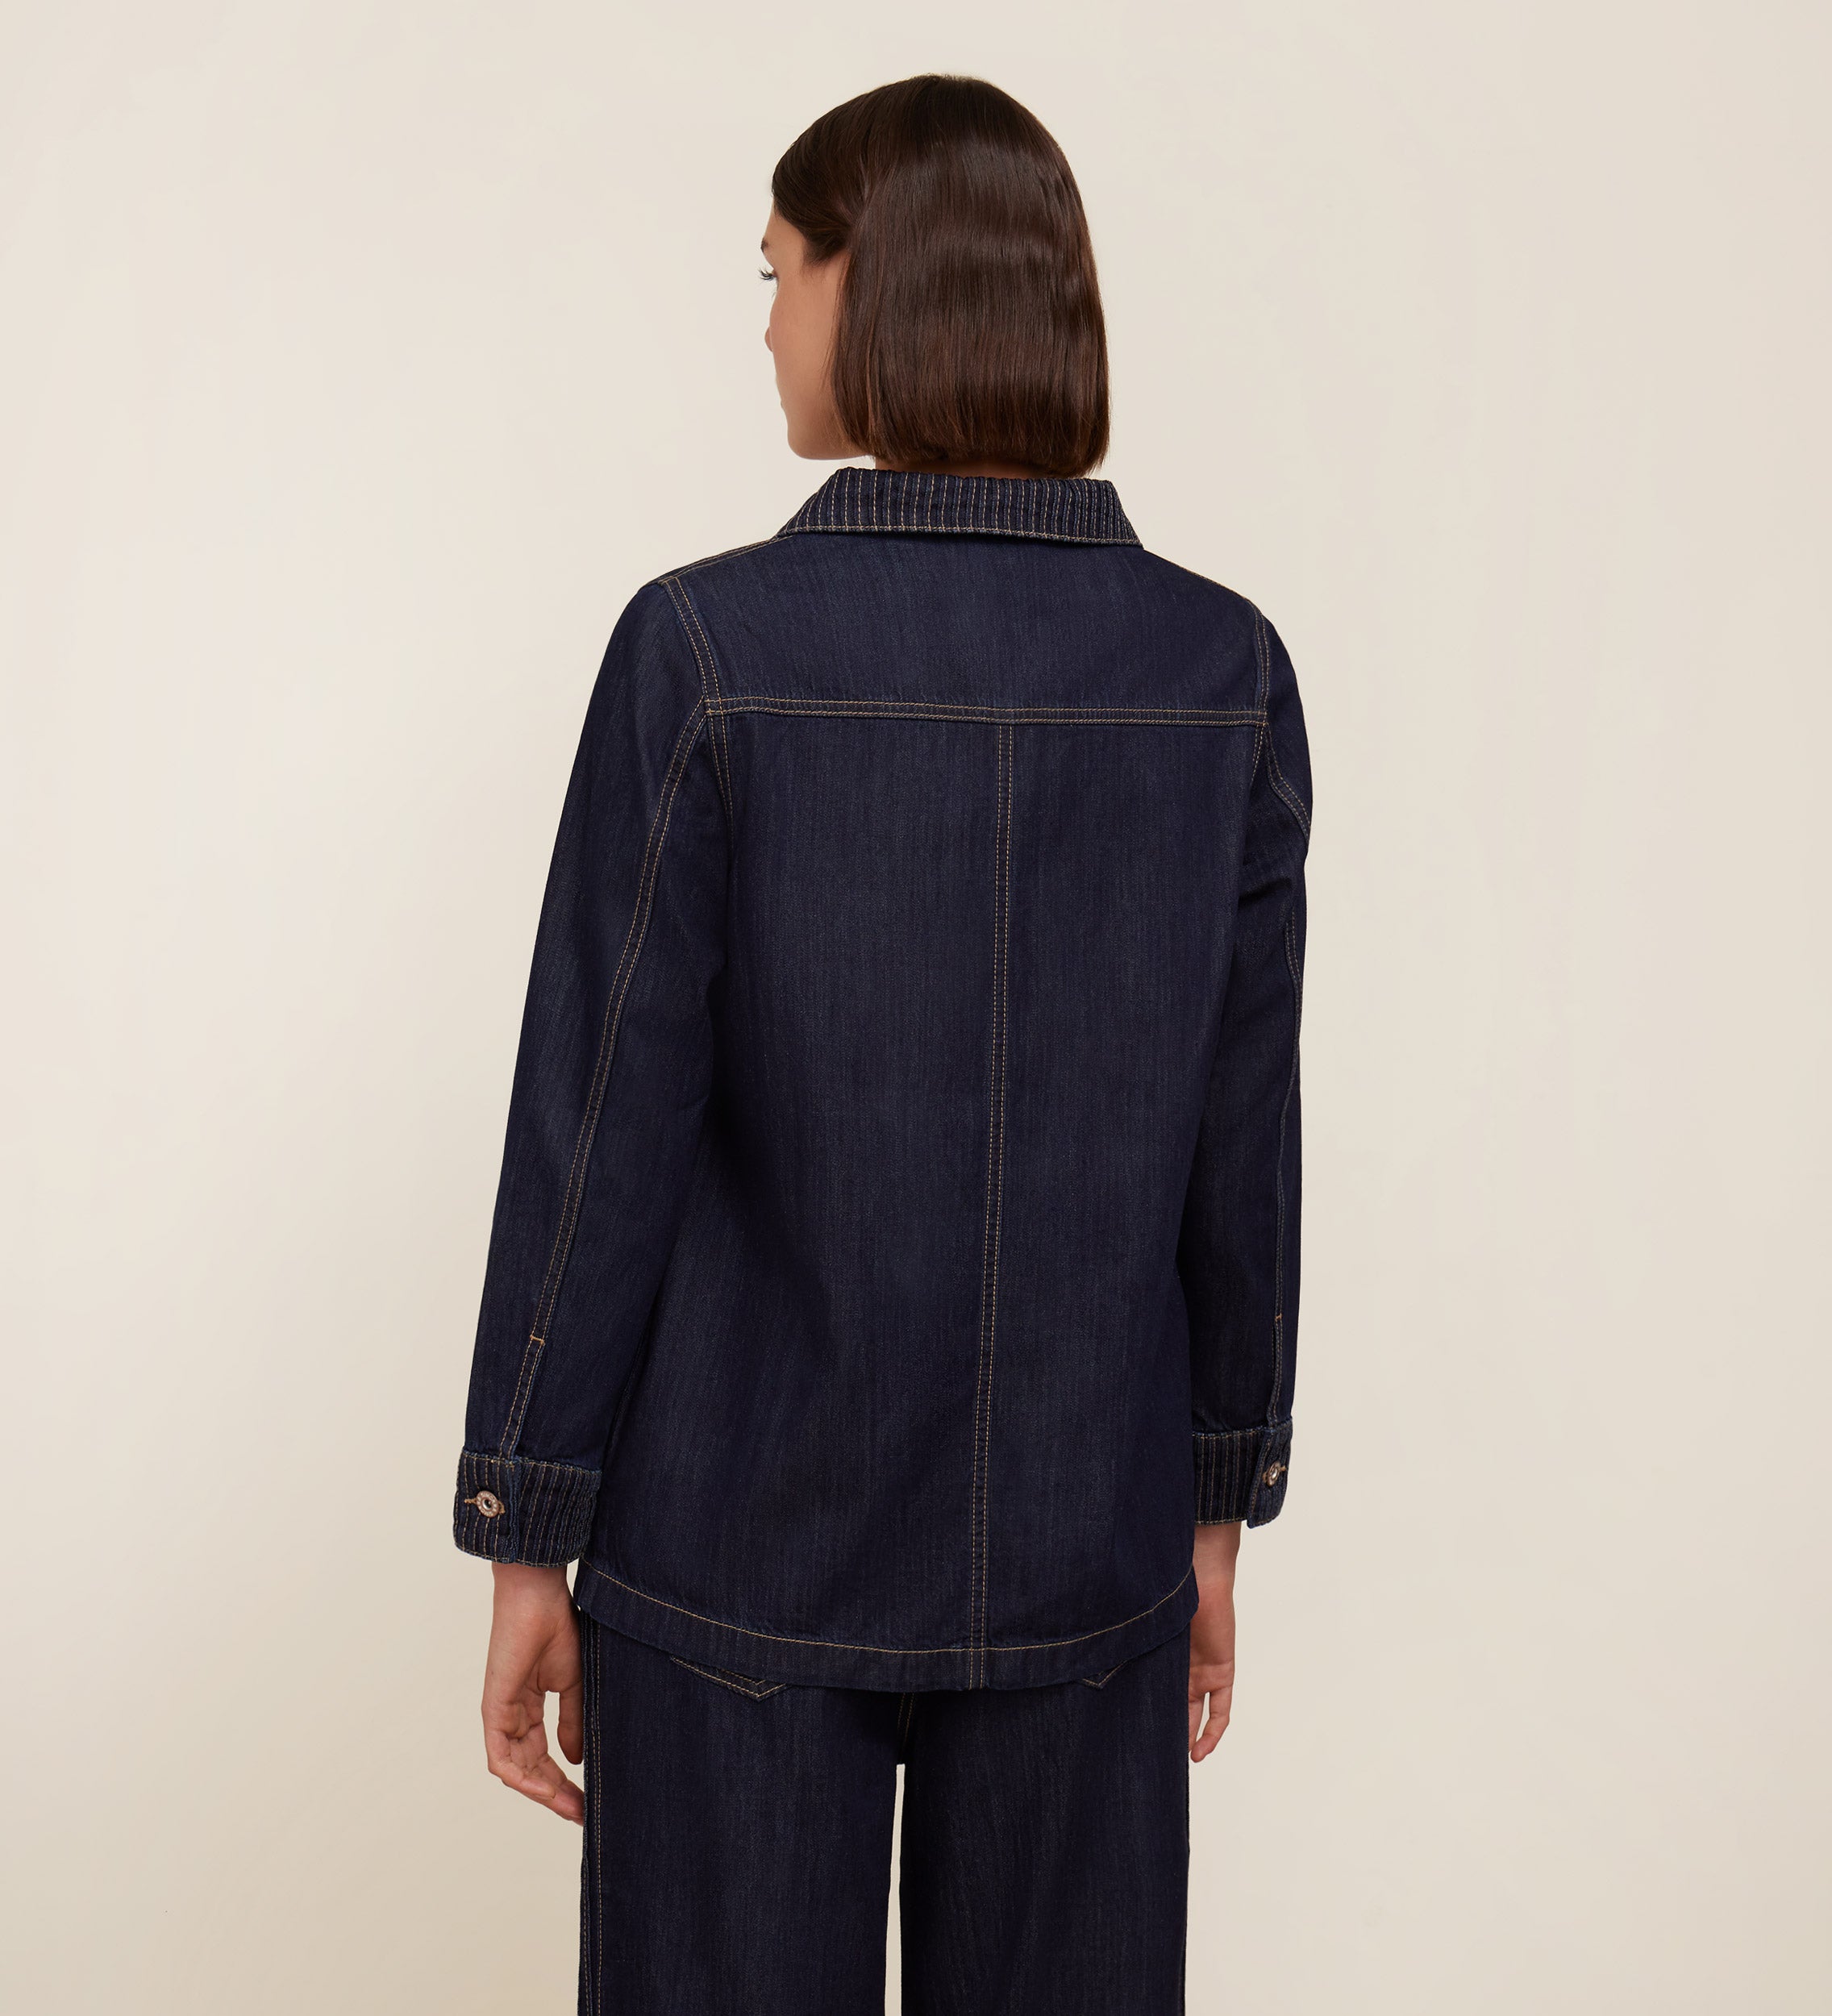 Drawstring overshirt with contrast stitching